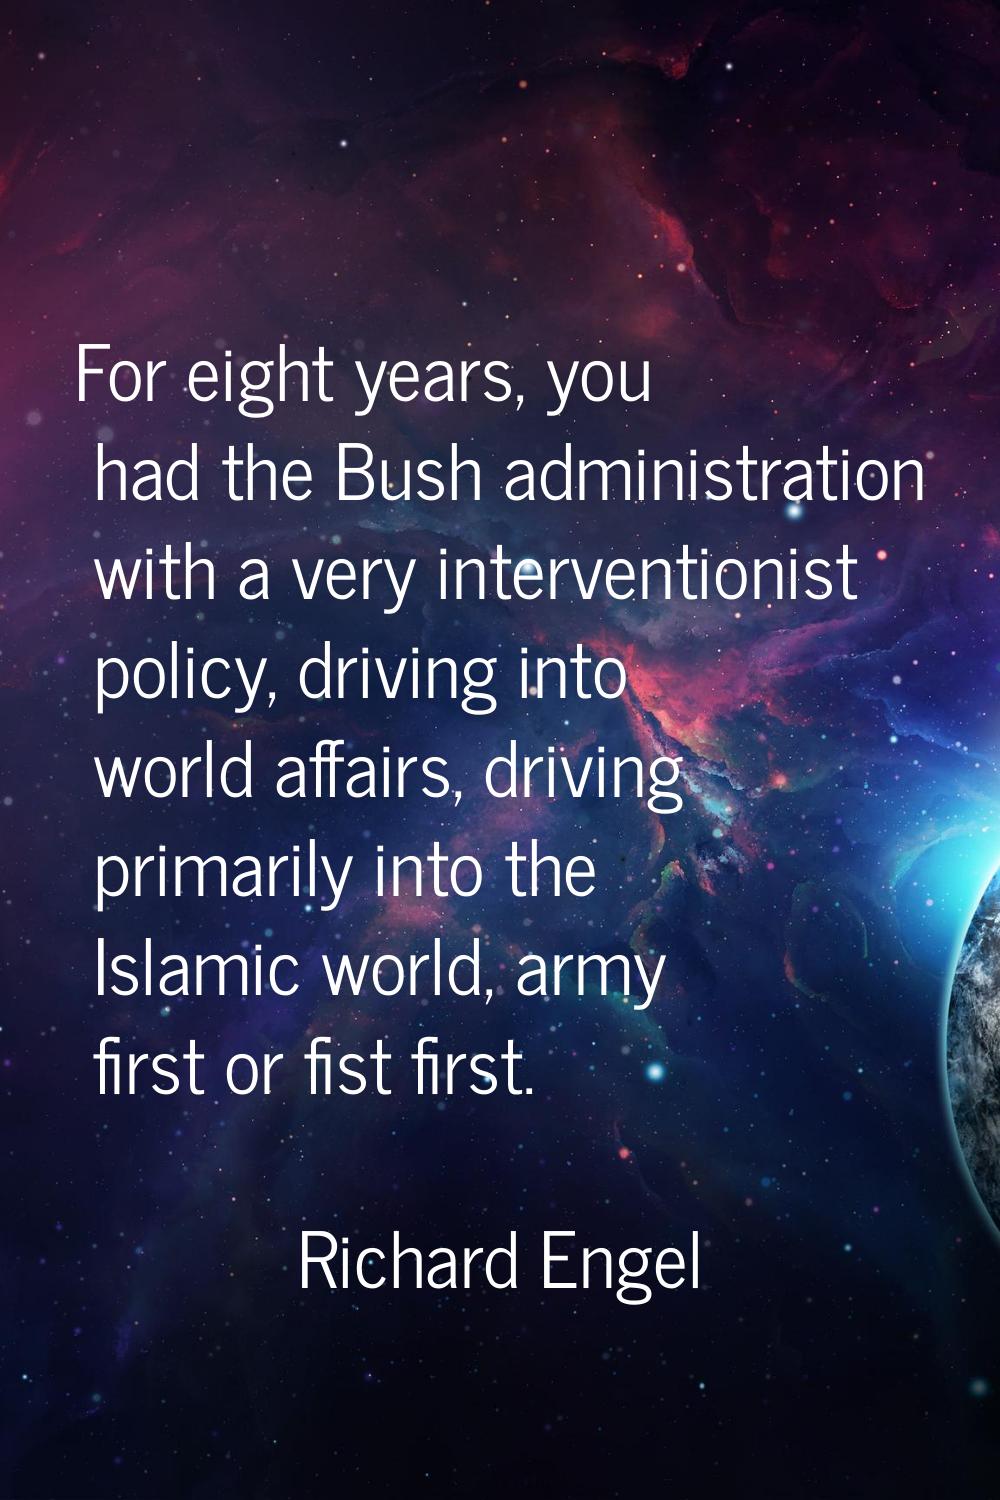 For eight years, you had the Bush administration with a very interventionist policy, driving into w